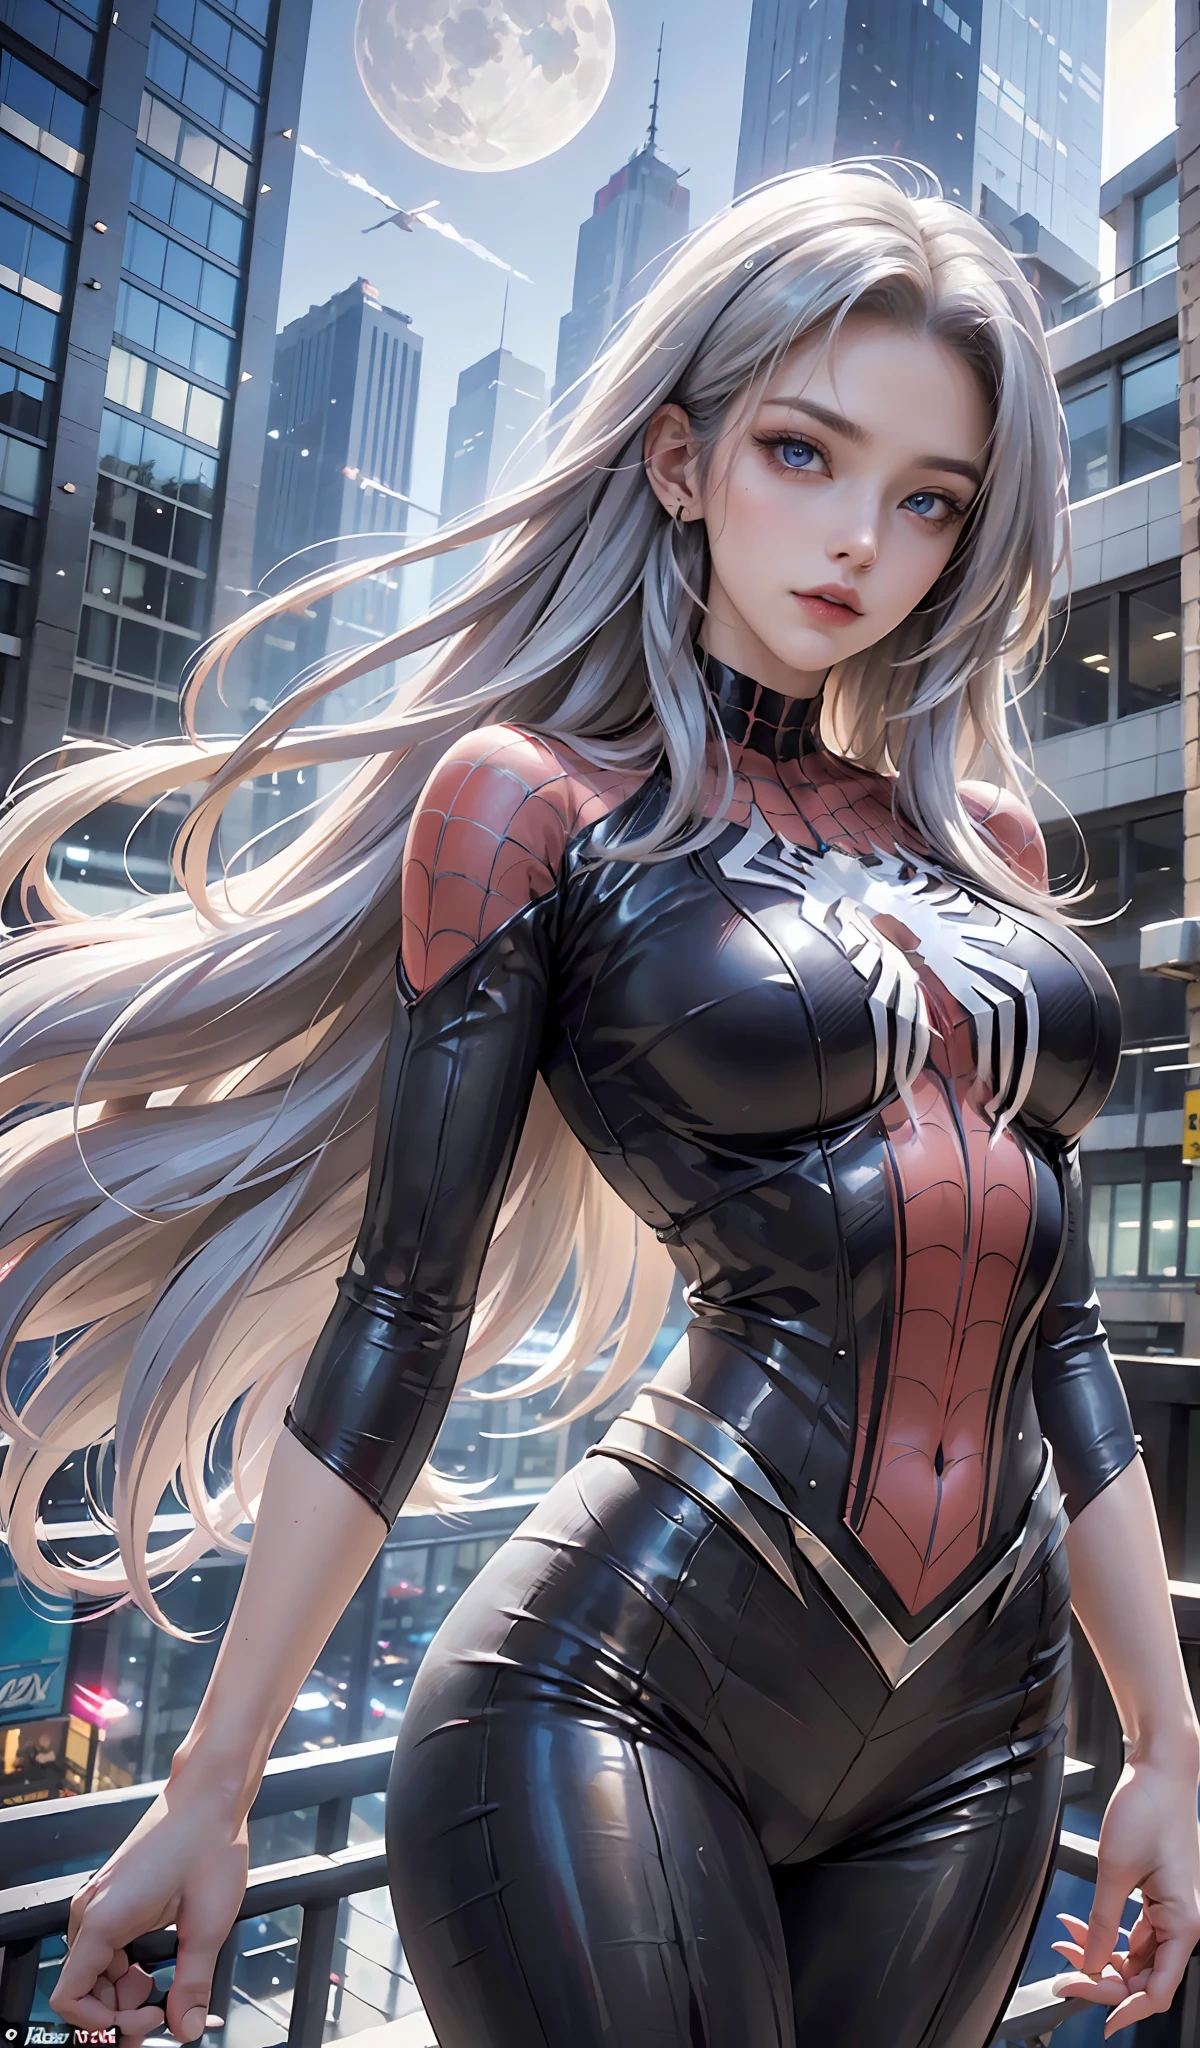 (Masterpiece, 4k resolution, ultra-realistic, very detailed), (White superhero theme, charismatic, there's a girl on top of town, wearing Spider-Man costume, she's a superhero), [ ((25 years), (long white hair:1.2), full body, (blue eyes:1.2), ((Spider-Man pose),show of strength, jumping from one building to another), ((sandy urban environment):0.8)| (cityscape, at night, dynamic lights), (full moon))] # Explanation: The Prompt mainly describes a 4K painting of ultra-high definition, very realistic, very detailed. It shows a superheroine at the top of the city, wearing a Spider-Man costume. The theme in the painting is a white superhero theme, the female protagonist has long white hair, is 25 years old and her entire body is shown in the painting. In terms of portraying the actions of superheroines, spiders are employed